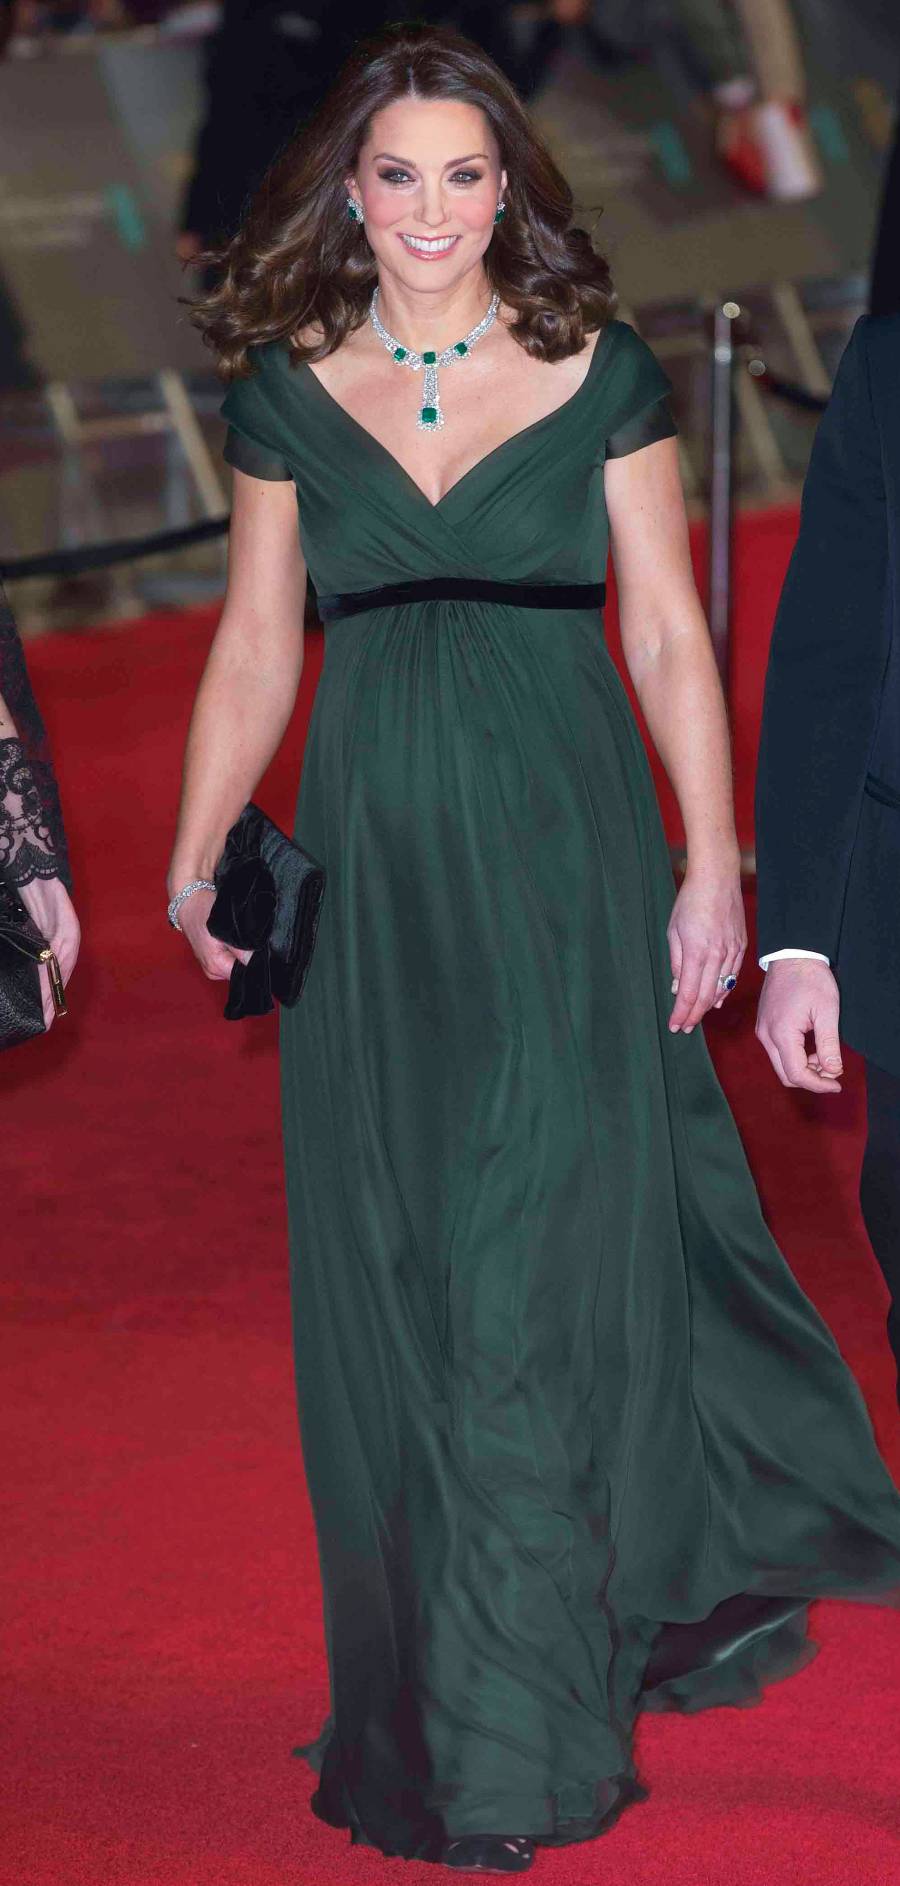 Duchess Kate and Prince William BAFTA Awards Red Carpet Appearances - 2018